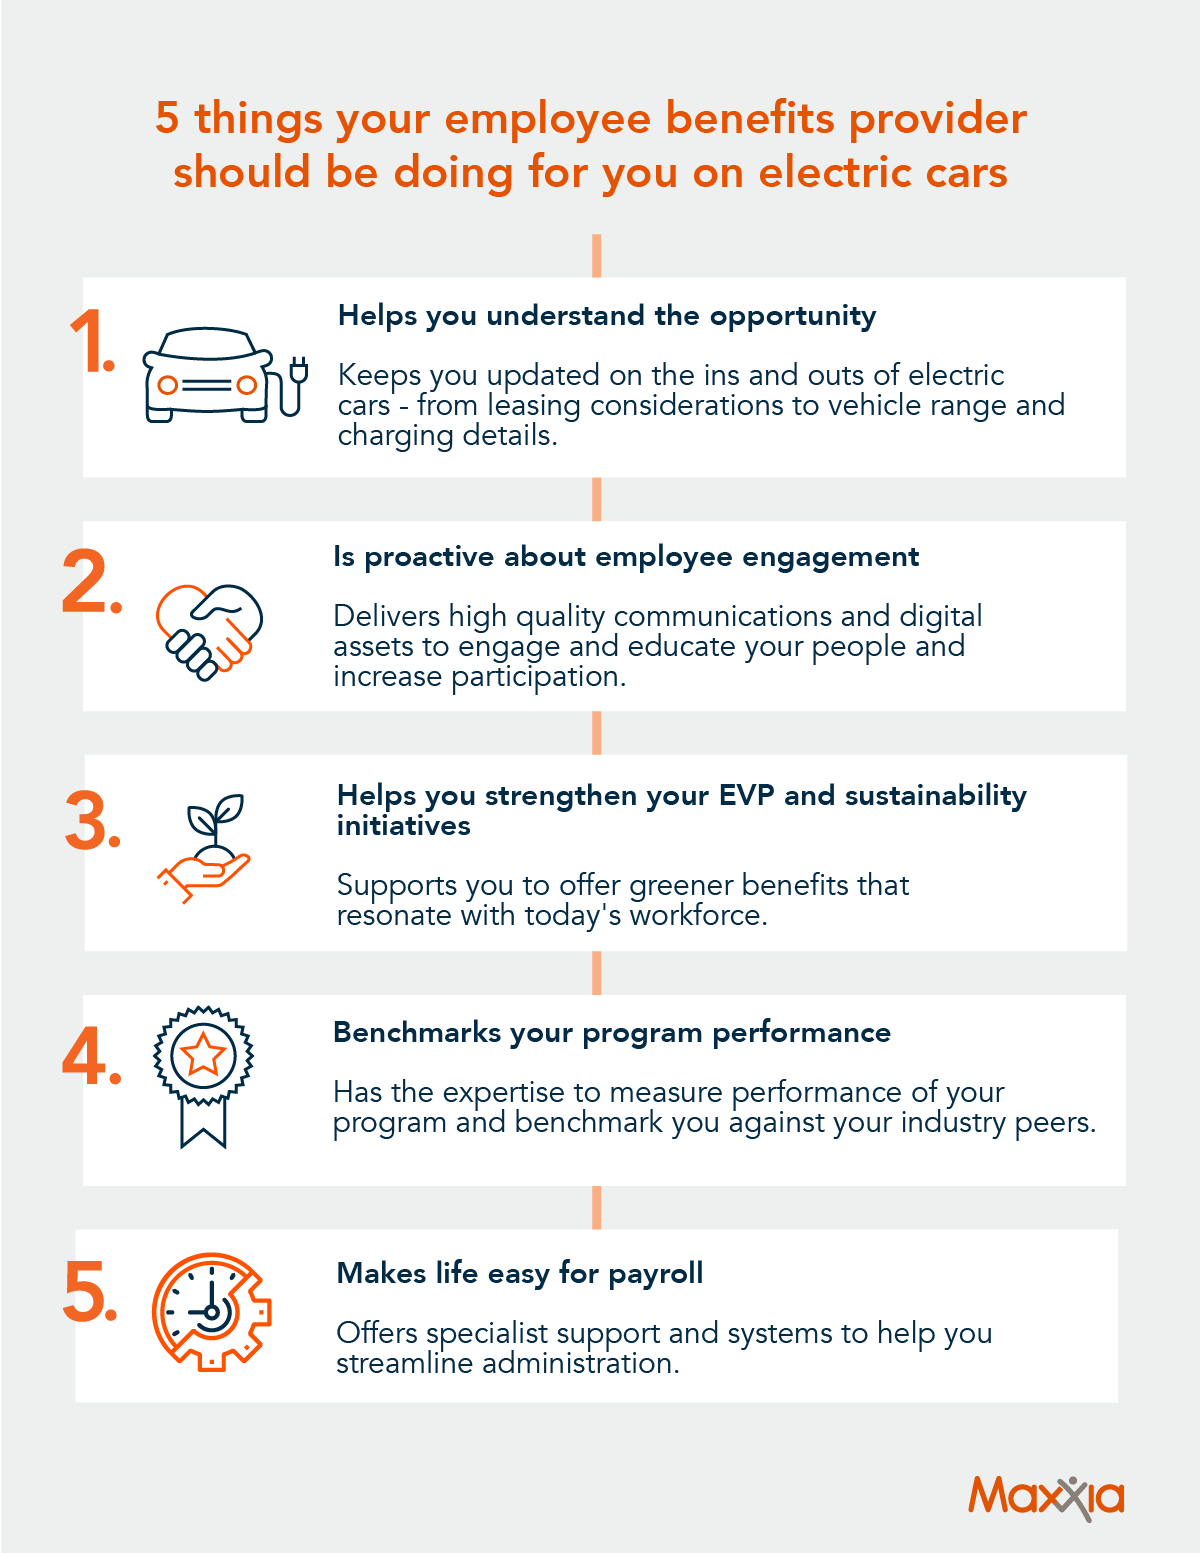 5 things your employee benefits provider should be doing for you on electric cars 